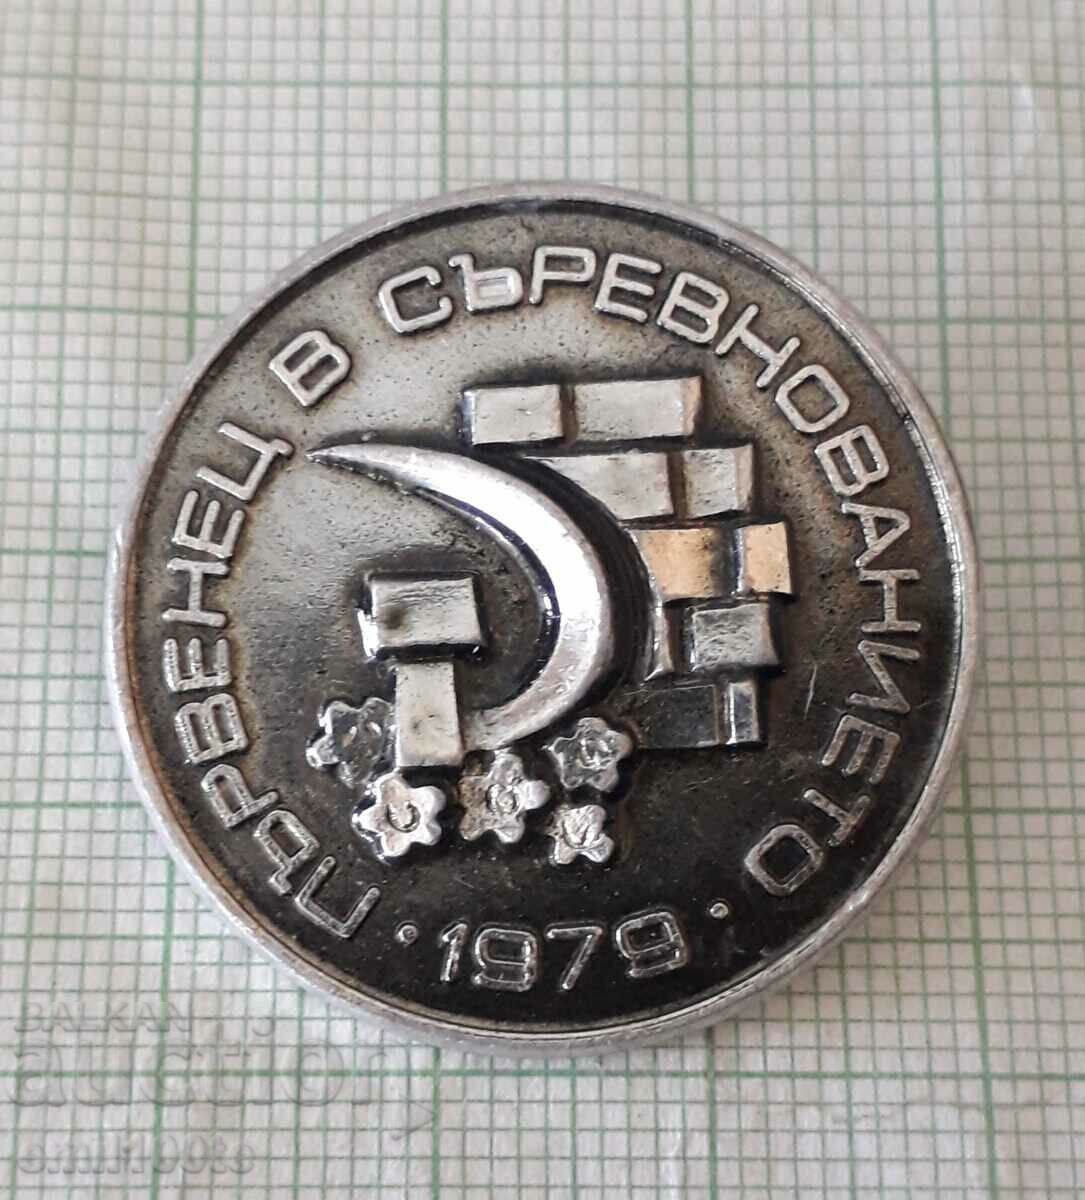 Badge - First place in the 1979 competition